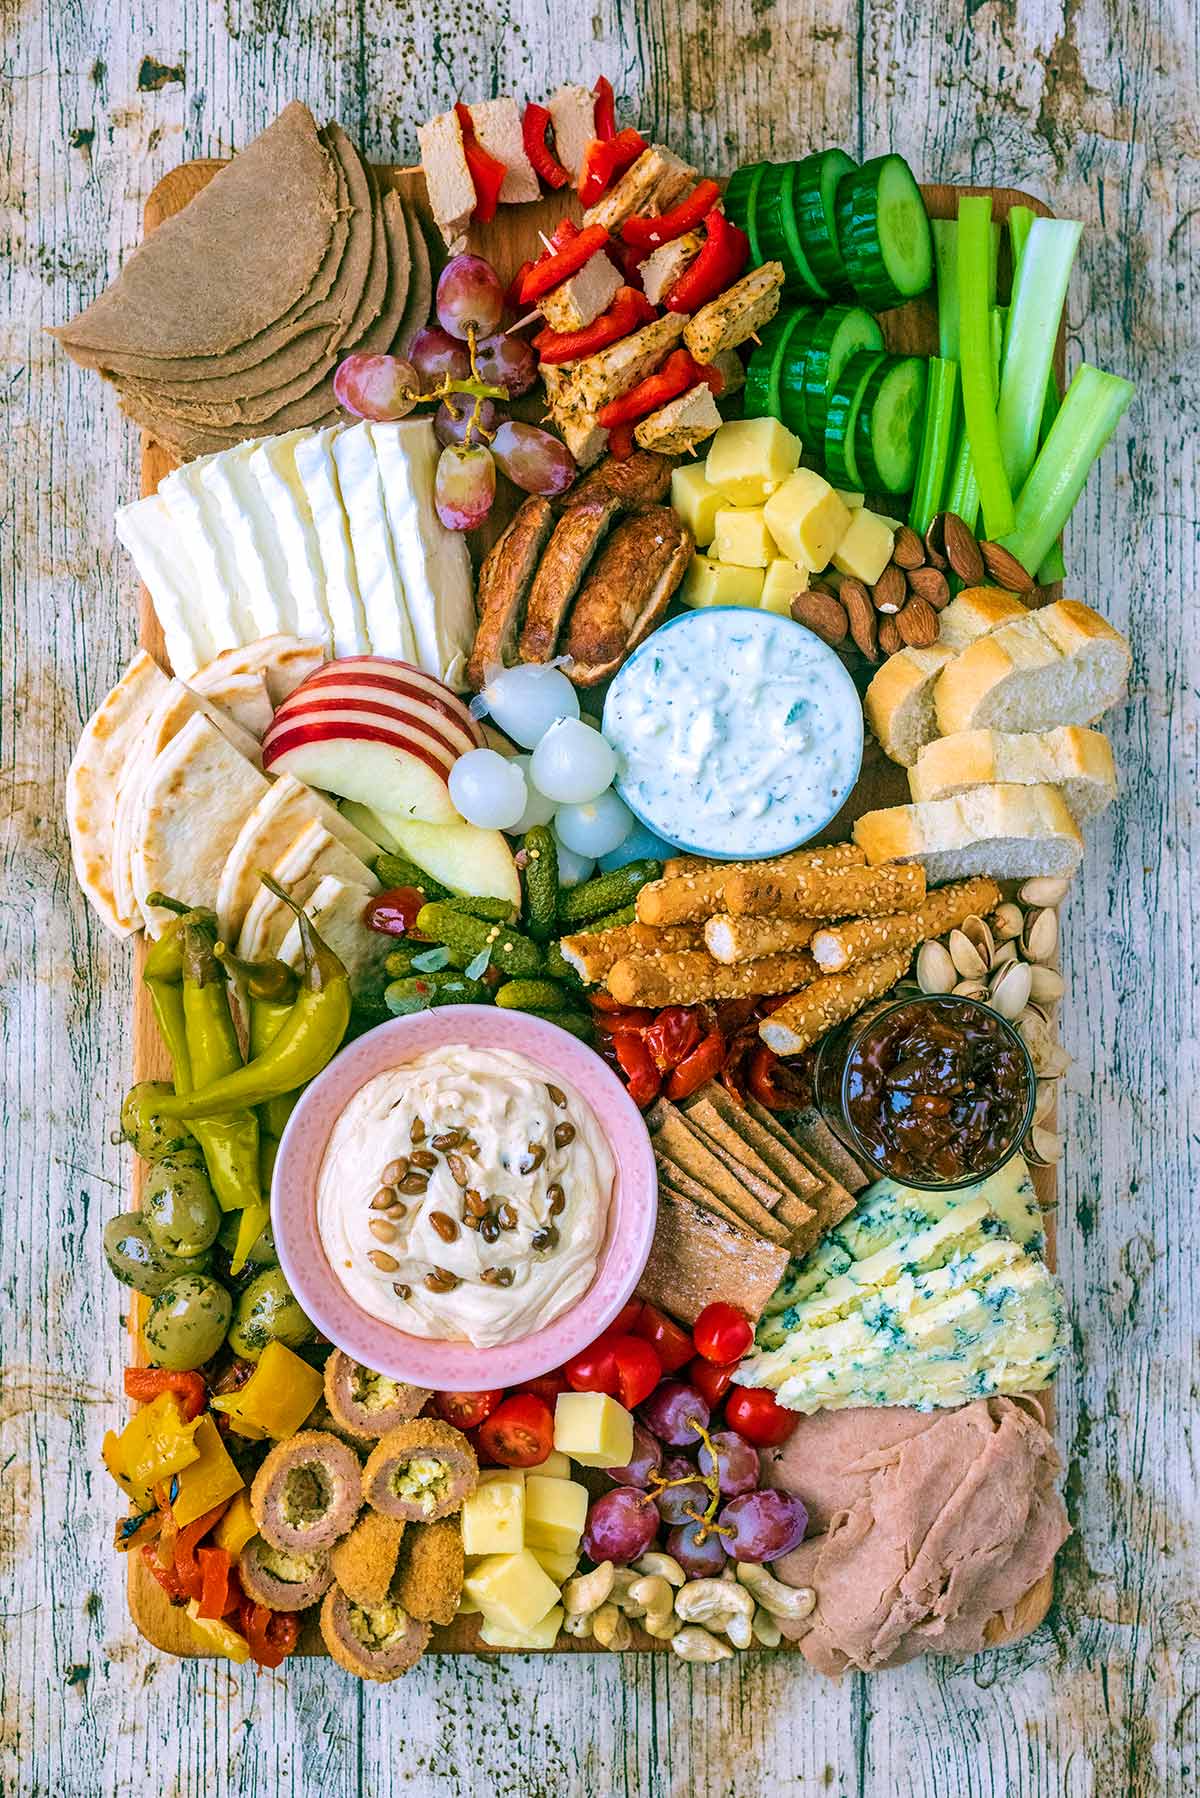 A charcuterie board full of meat, bread, cheese, nuts, pickles and vegetables.